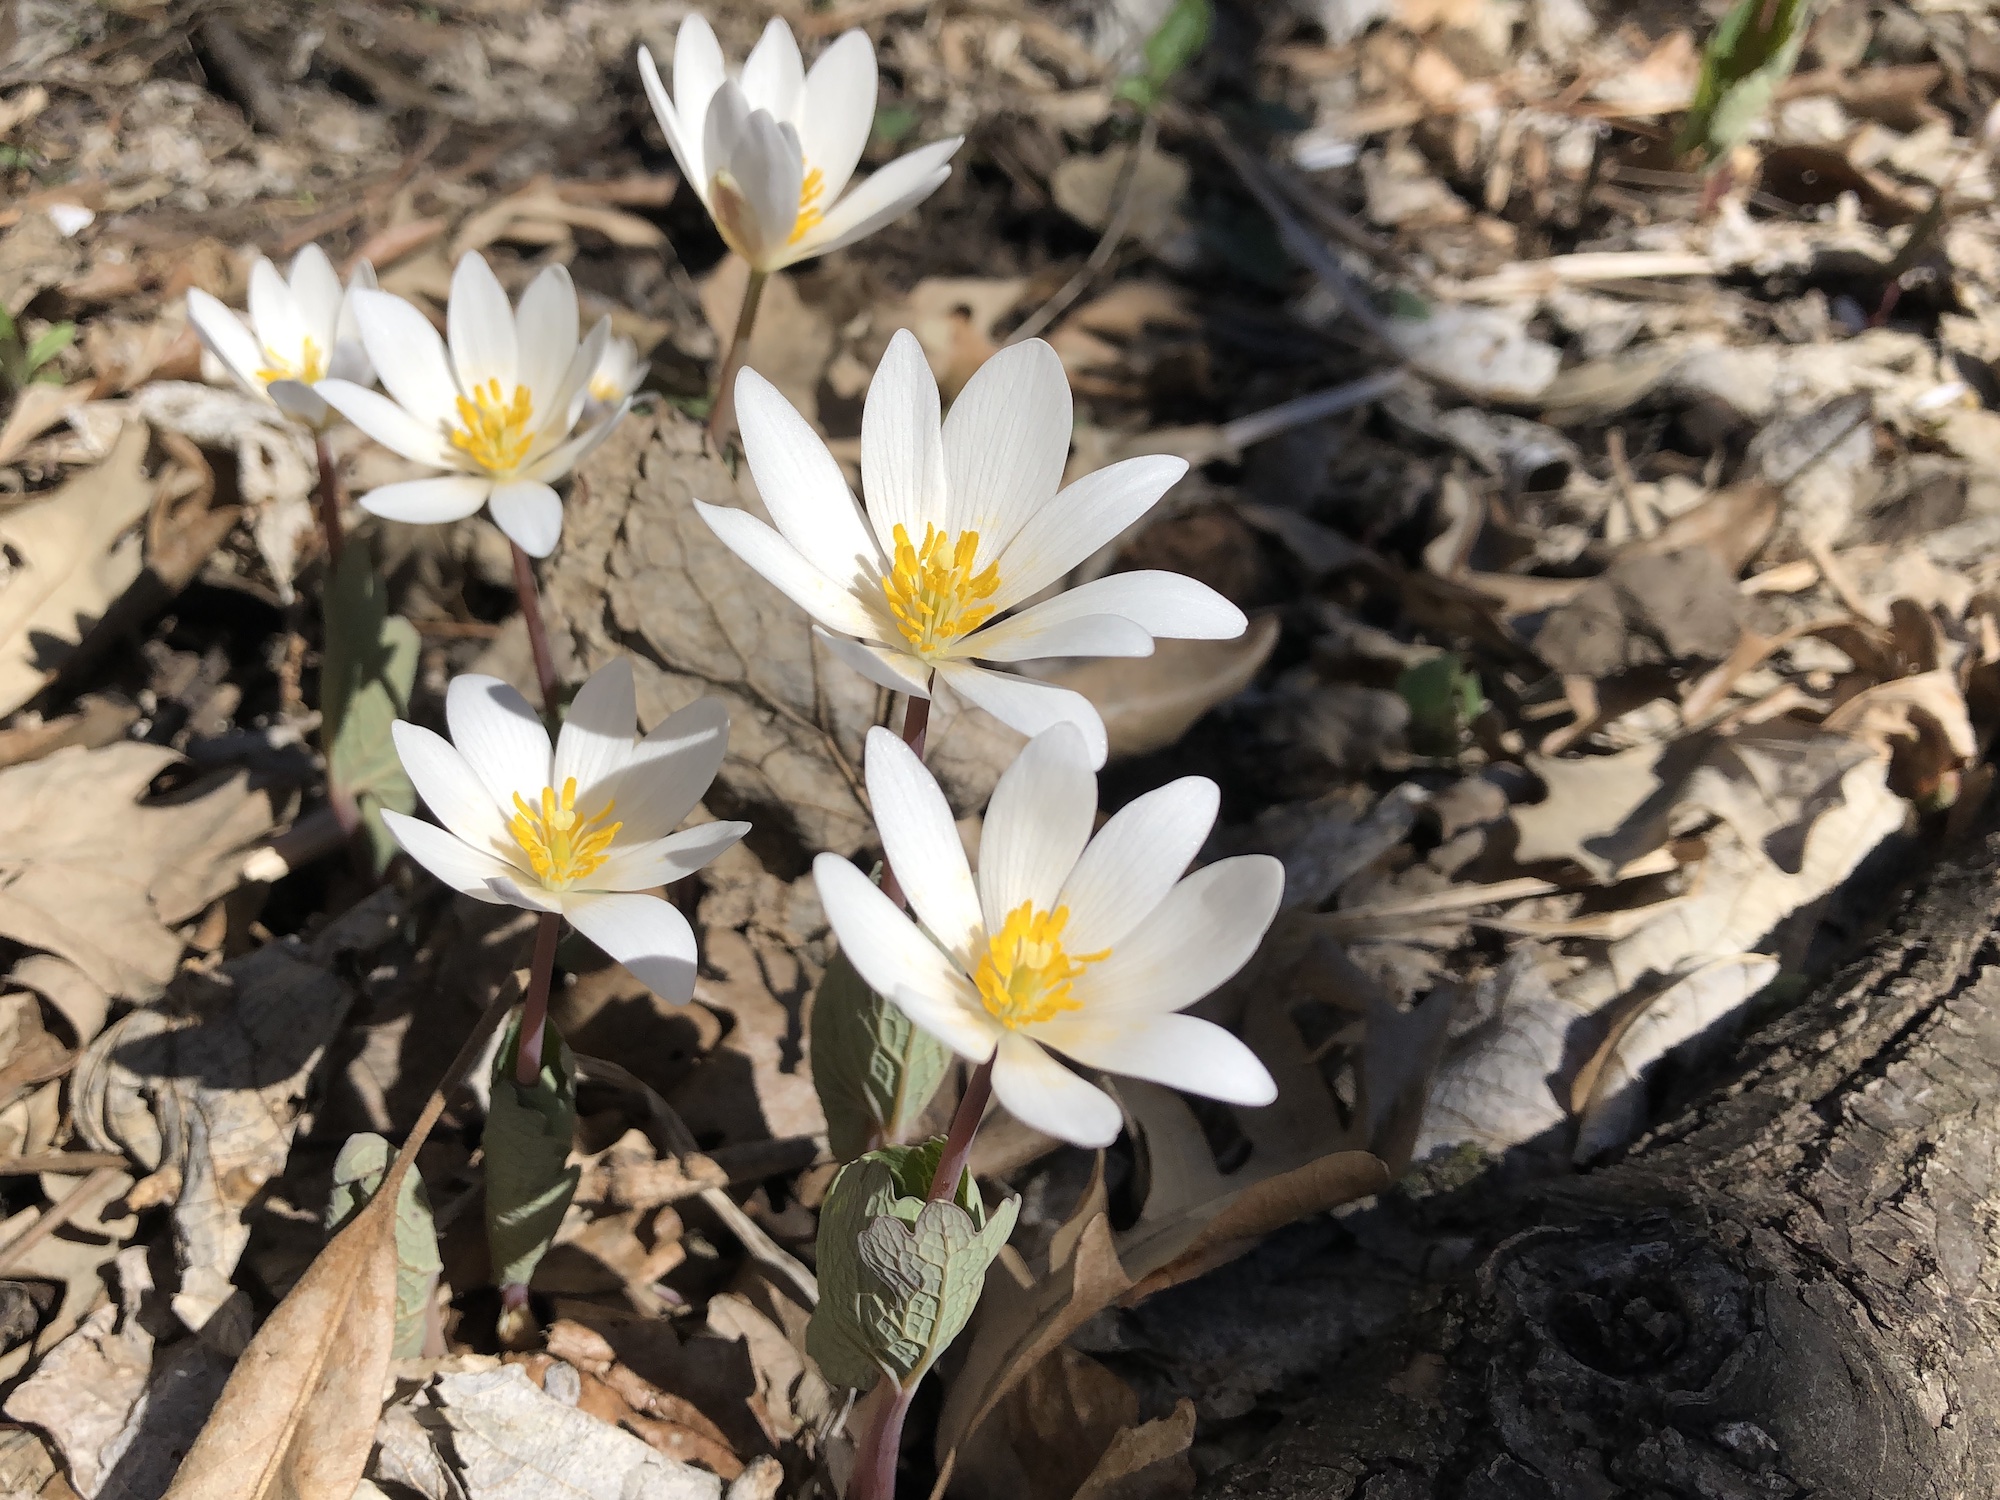 Bloodroot photo taken on April 19, 2019 in Madison, Wisconsin near Council Ring.